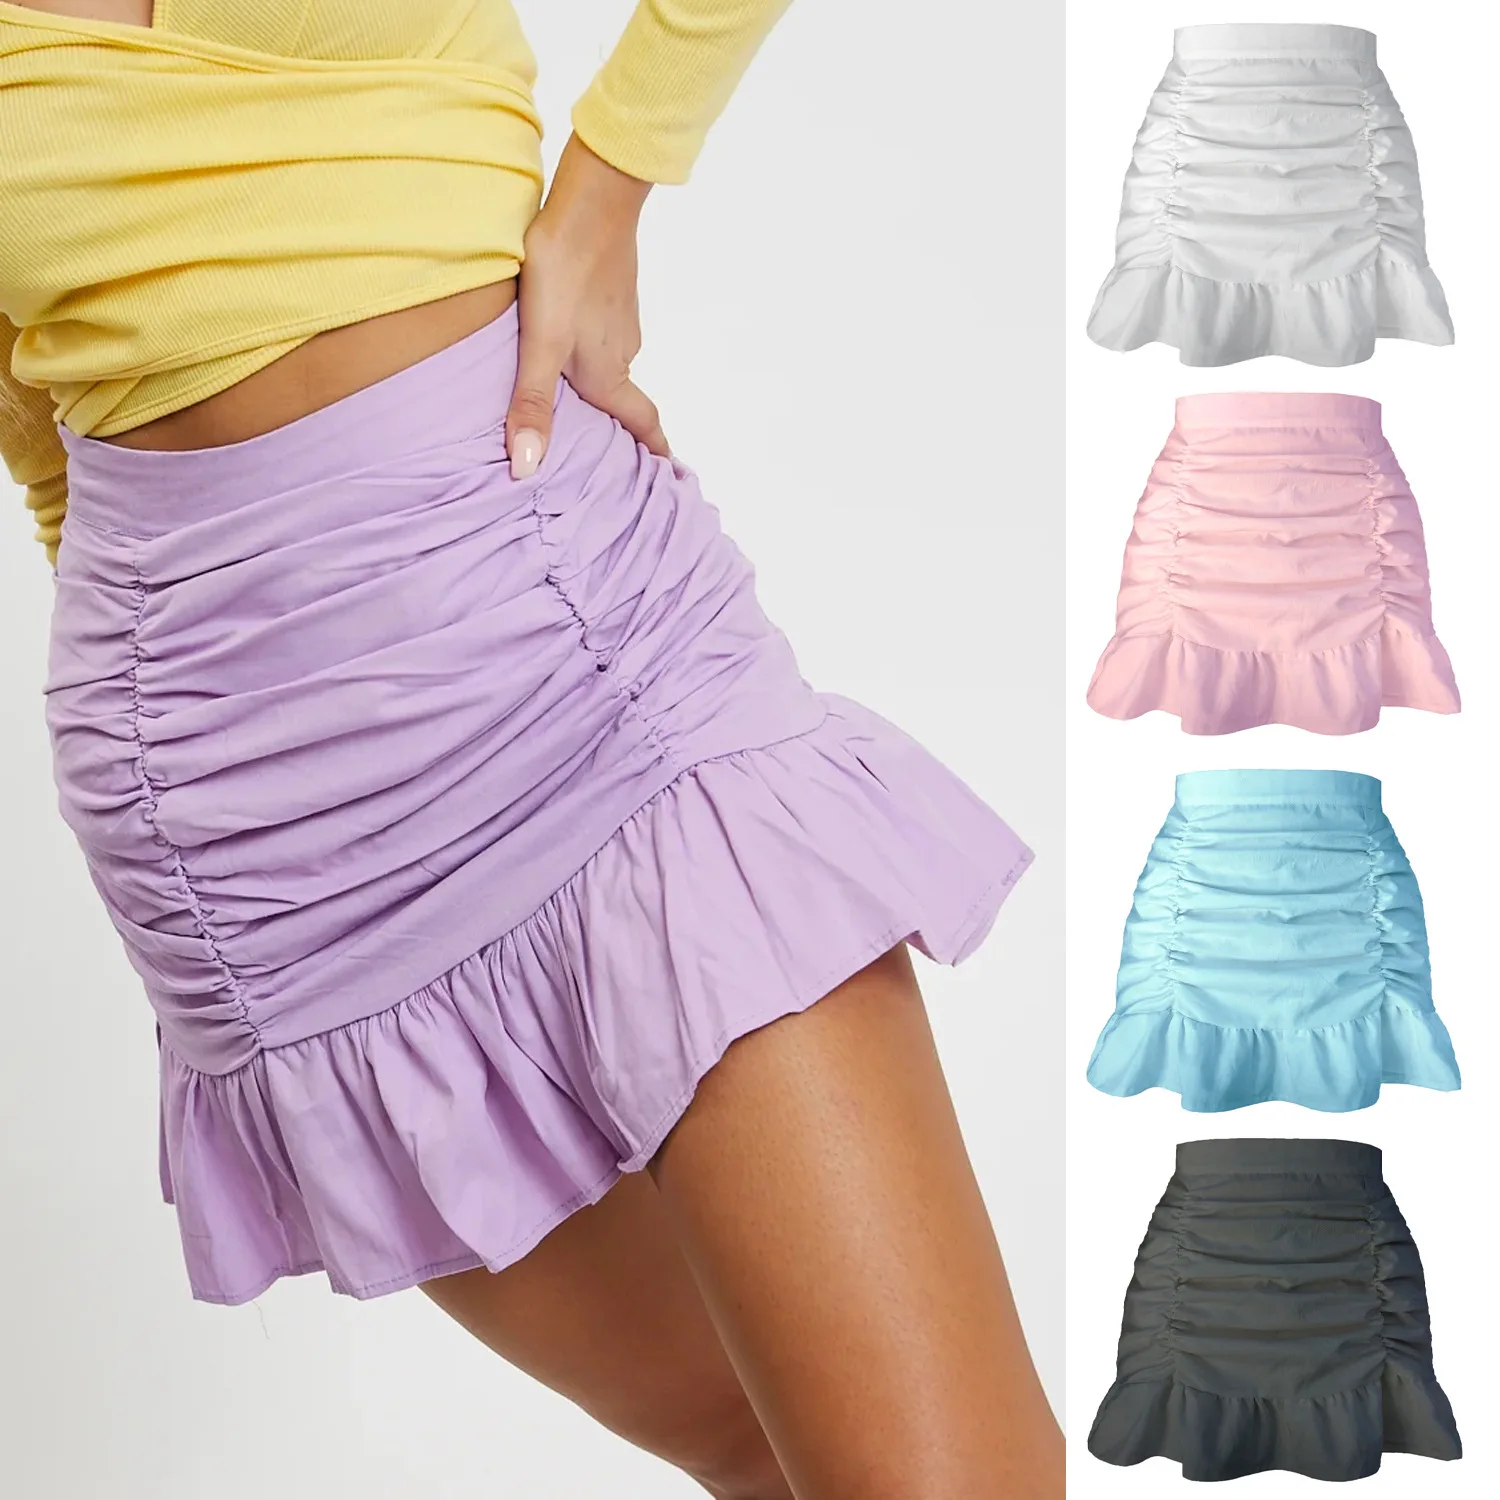 

Women's Fresh Mini Skirt With Solid Color Pleated Ruffle Edge Design High Waisted And Buttocks Wrapped Fishtail Short Skirt Юбка